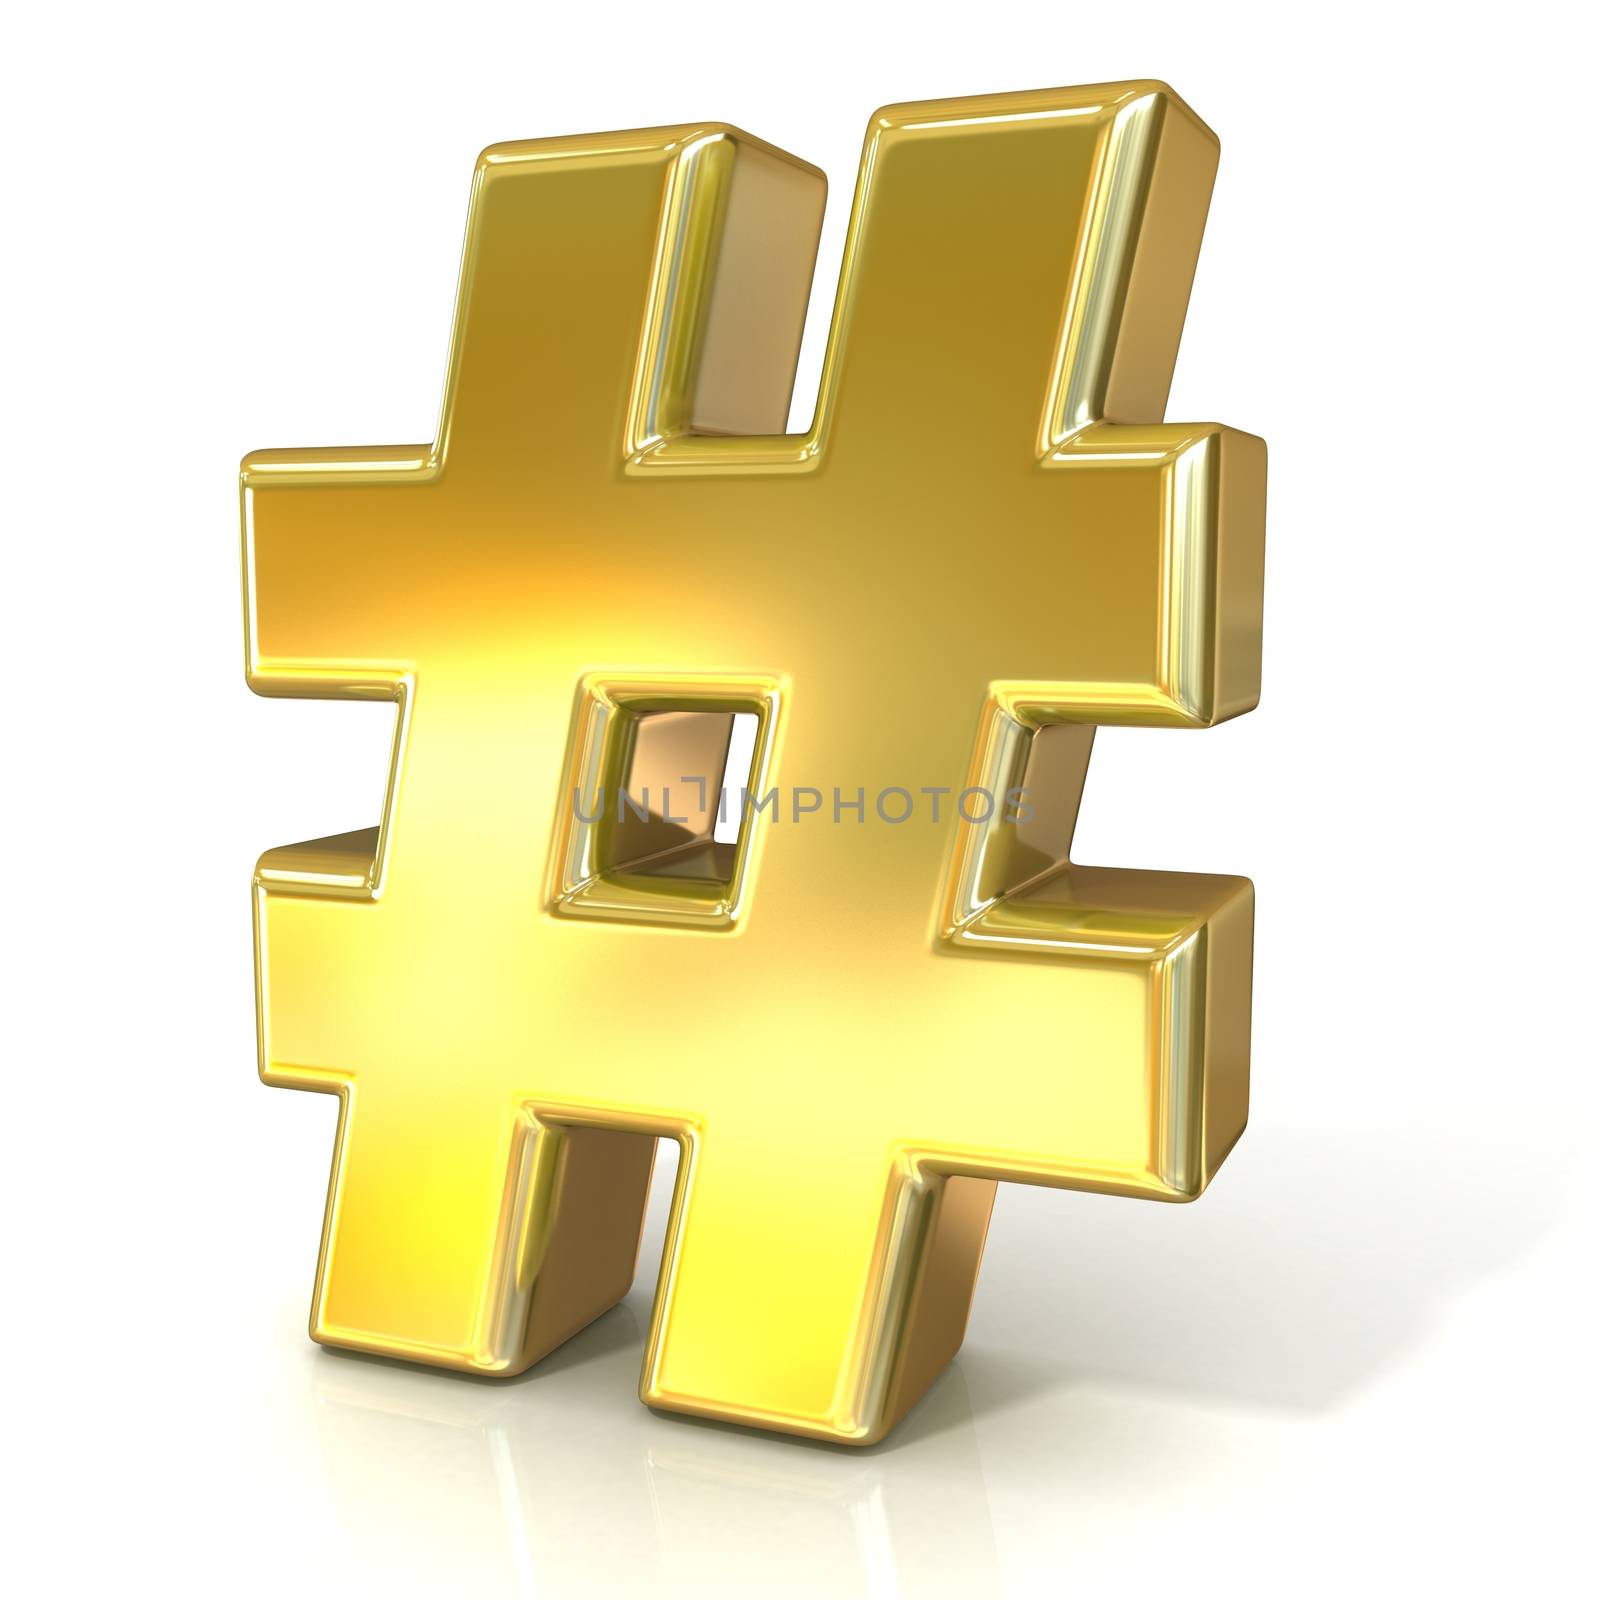 Hashtag, number mark 3D golden sign isolated on white background